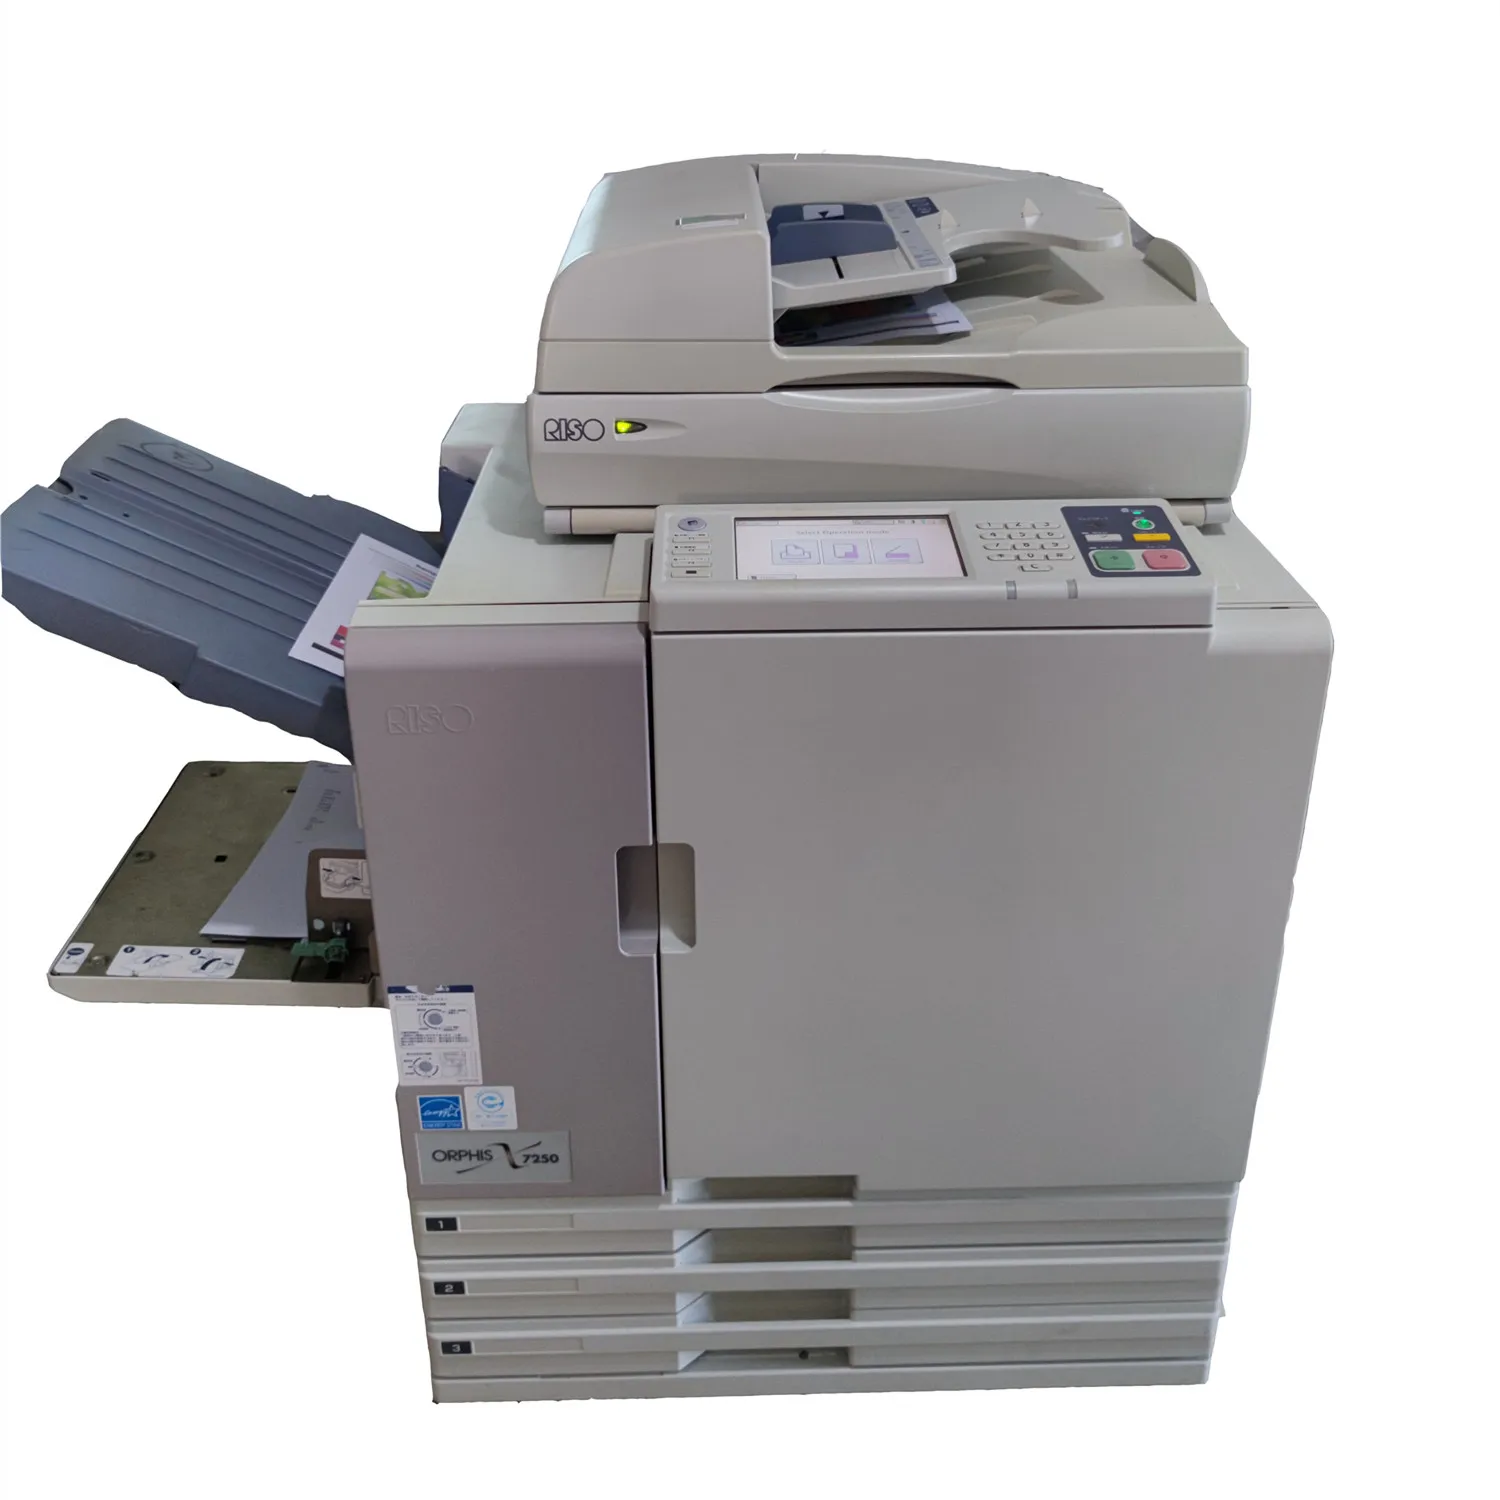 Wholesale and good working Printers for RISO Comcolor X7250 7010 Inkjet Printer,Carbonless printers From m.alibaba.com